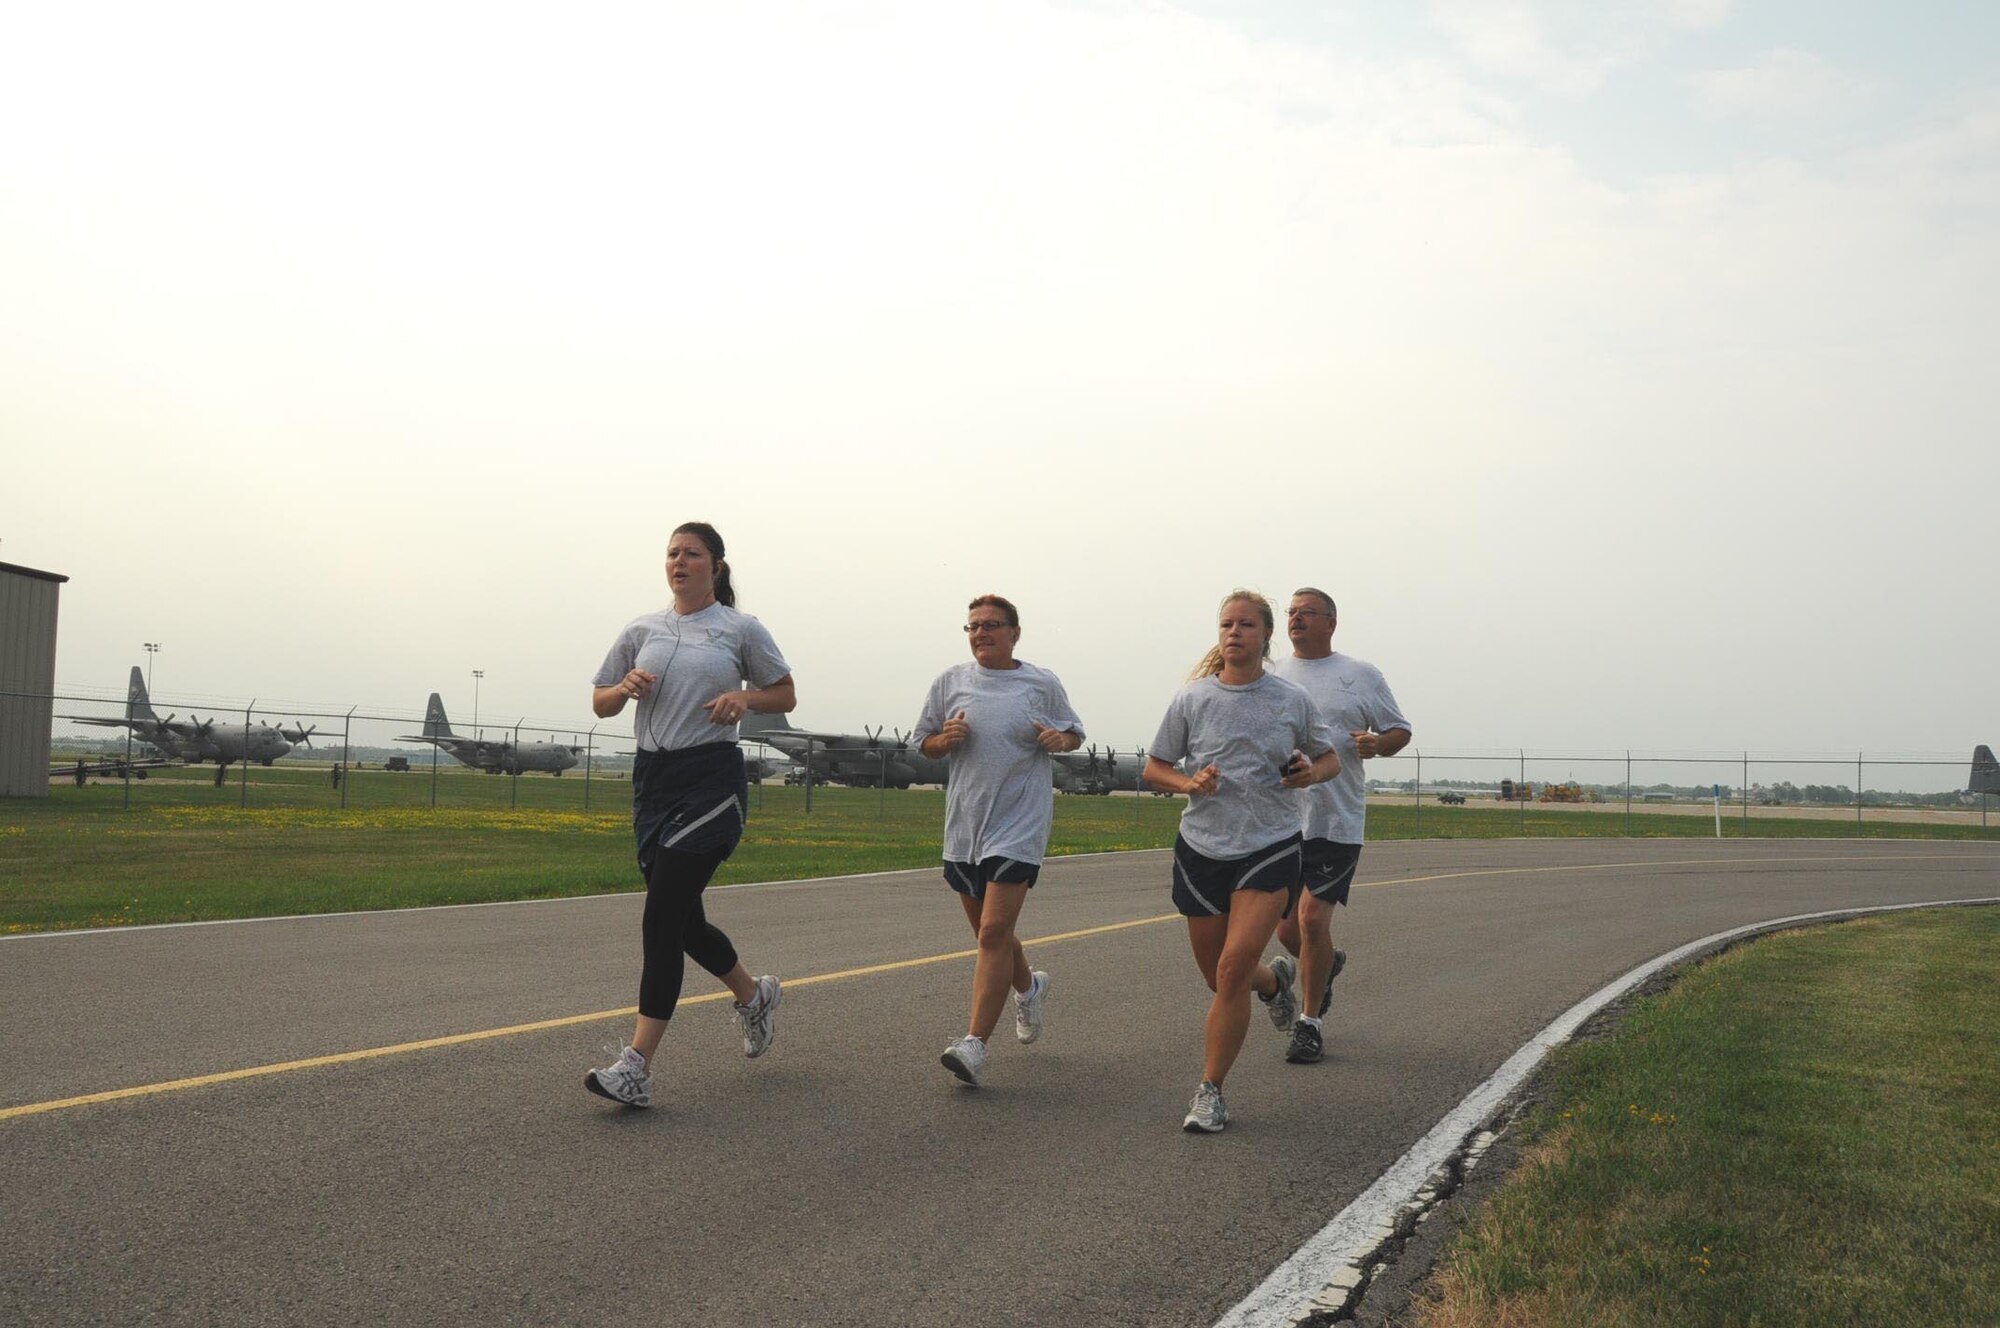 MSgt Melissa Shenefiel, MSgt Laura Thomas, TSgt Rachel Baker and MSgt Michael Margarucci doing their final phase of the PT test the 1 1/2 mile run.(Air Force Photo/SMSgt Ray Lloyd)